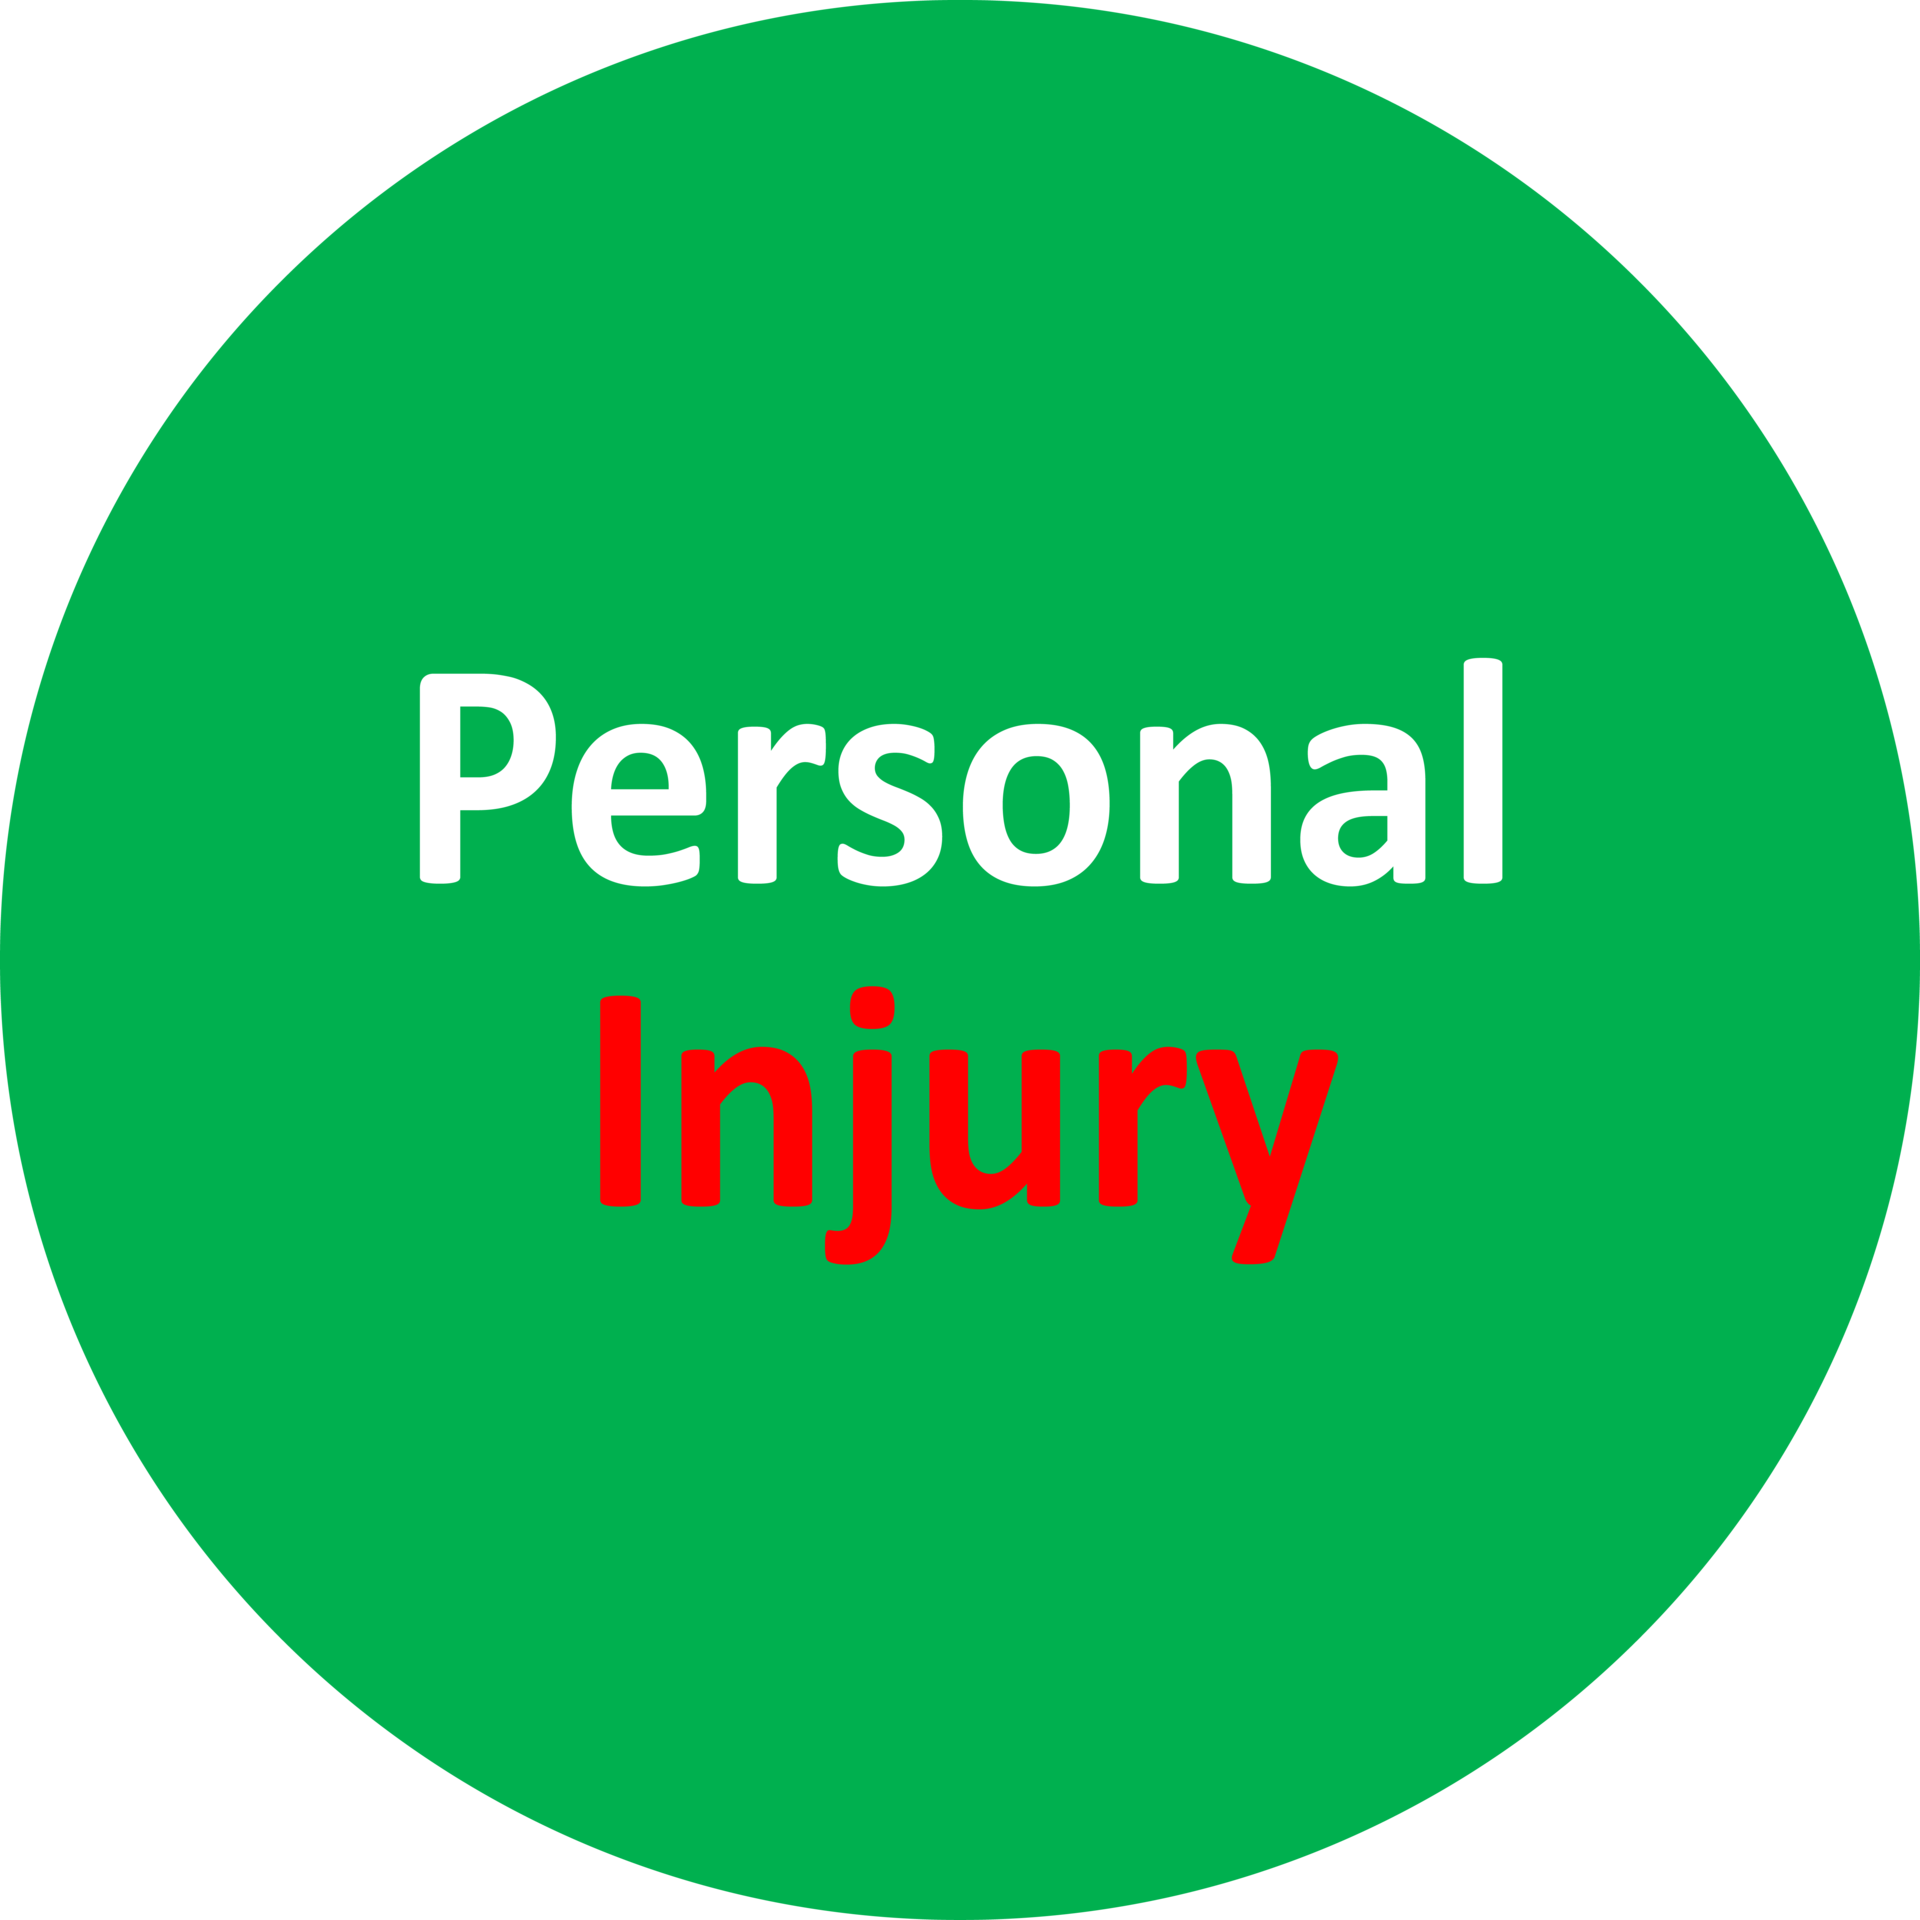 Personal Injury; visit our no win no fee solicitors' page, by following the link below.